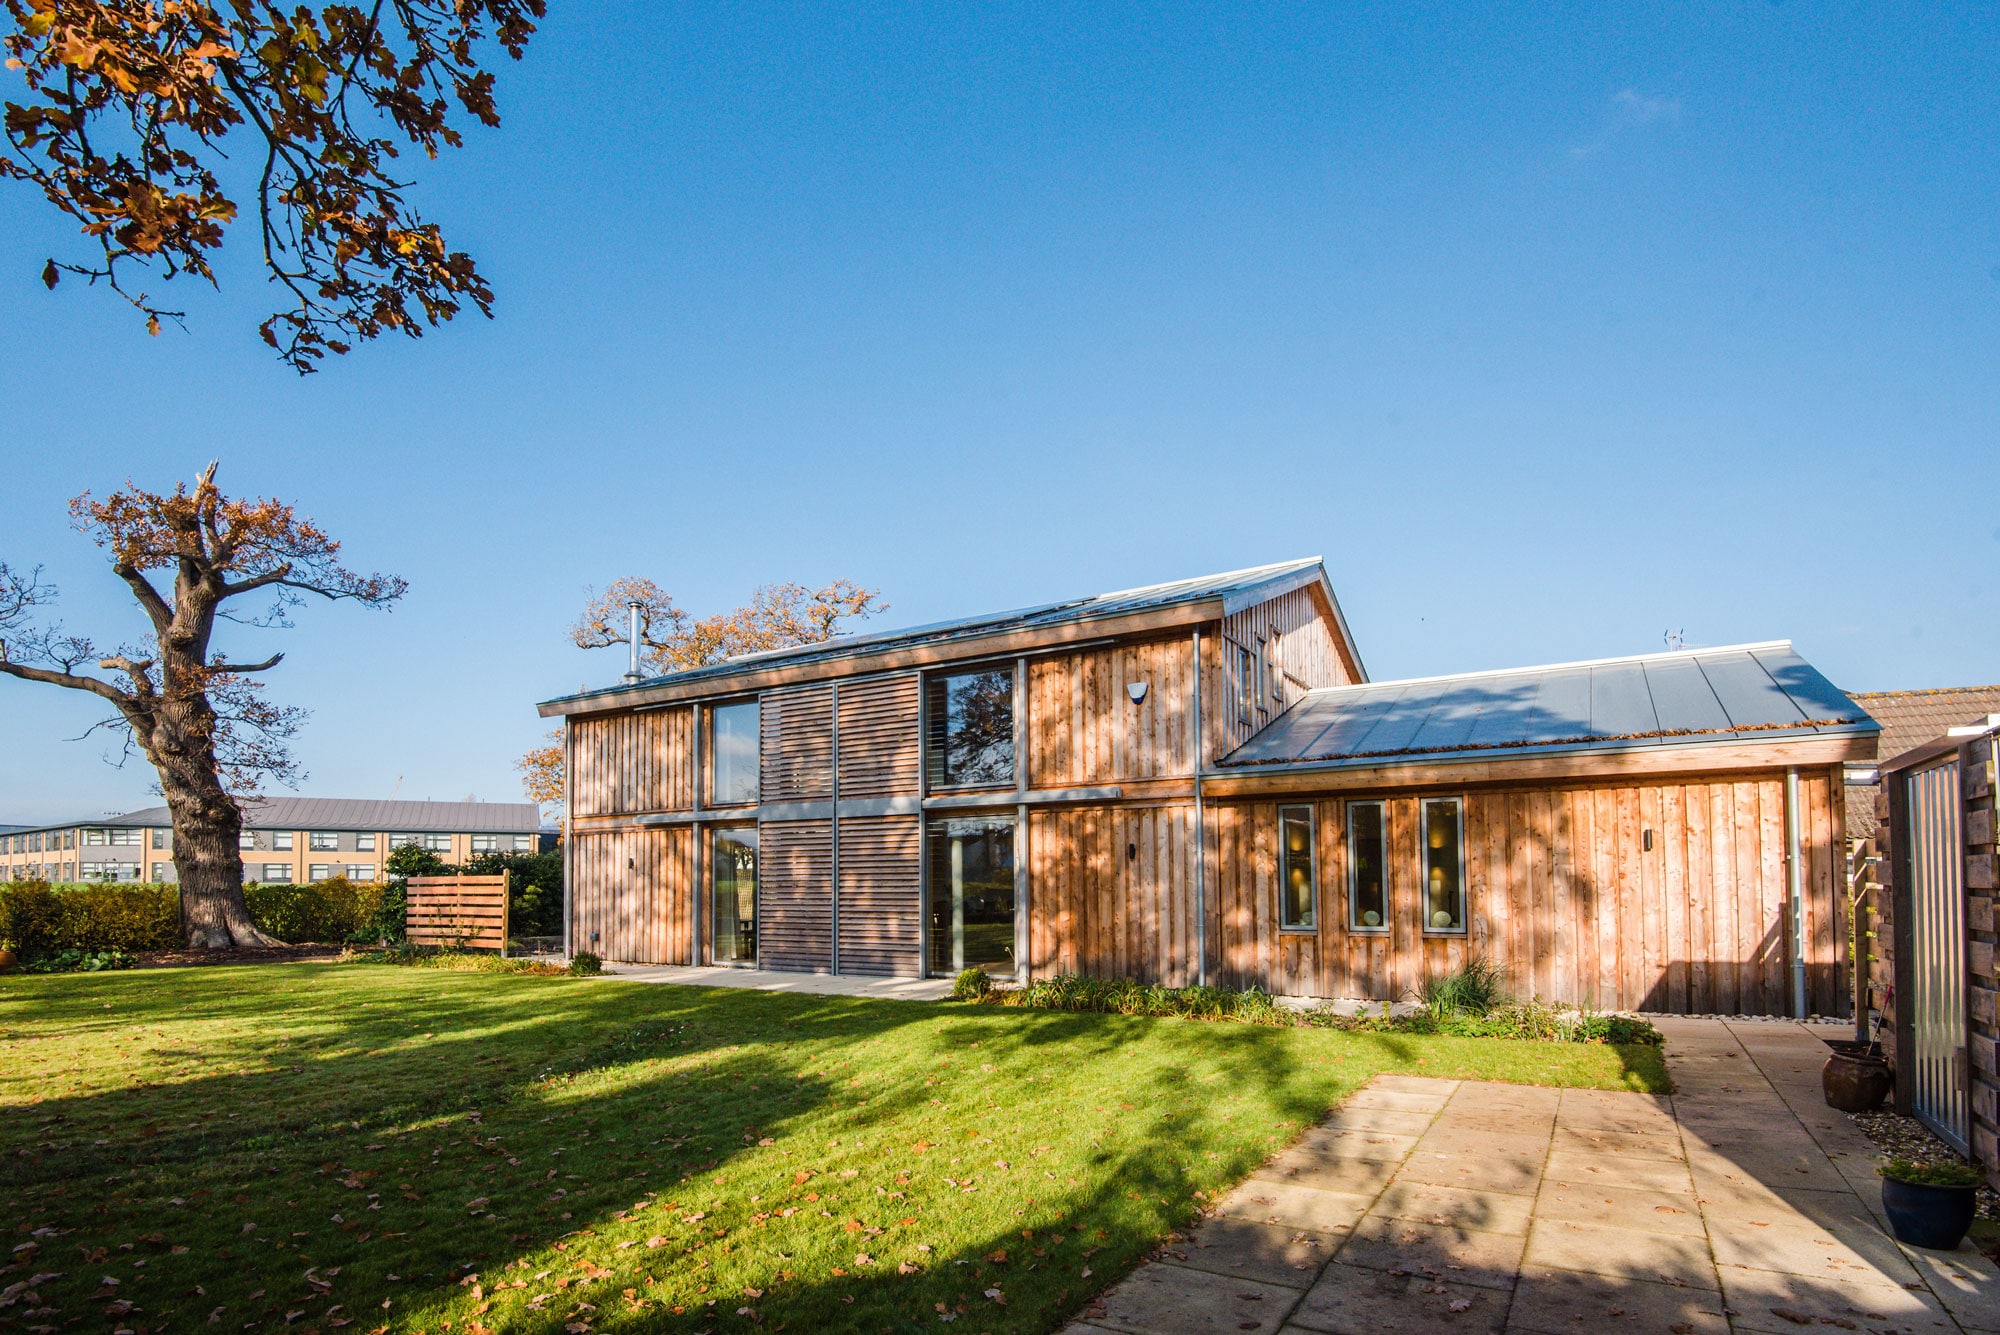 Large detached timber clad new build